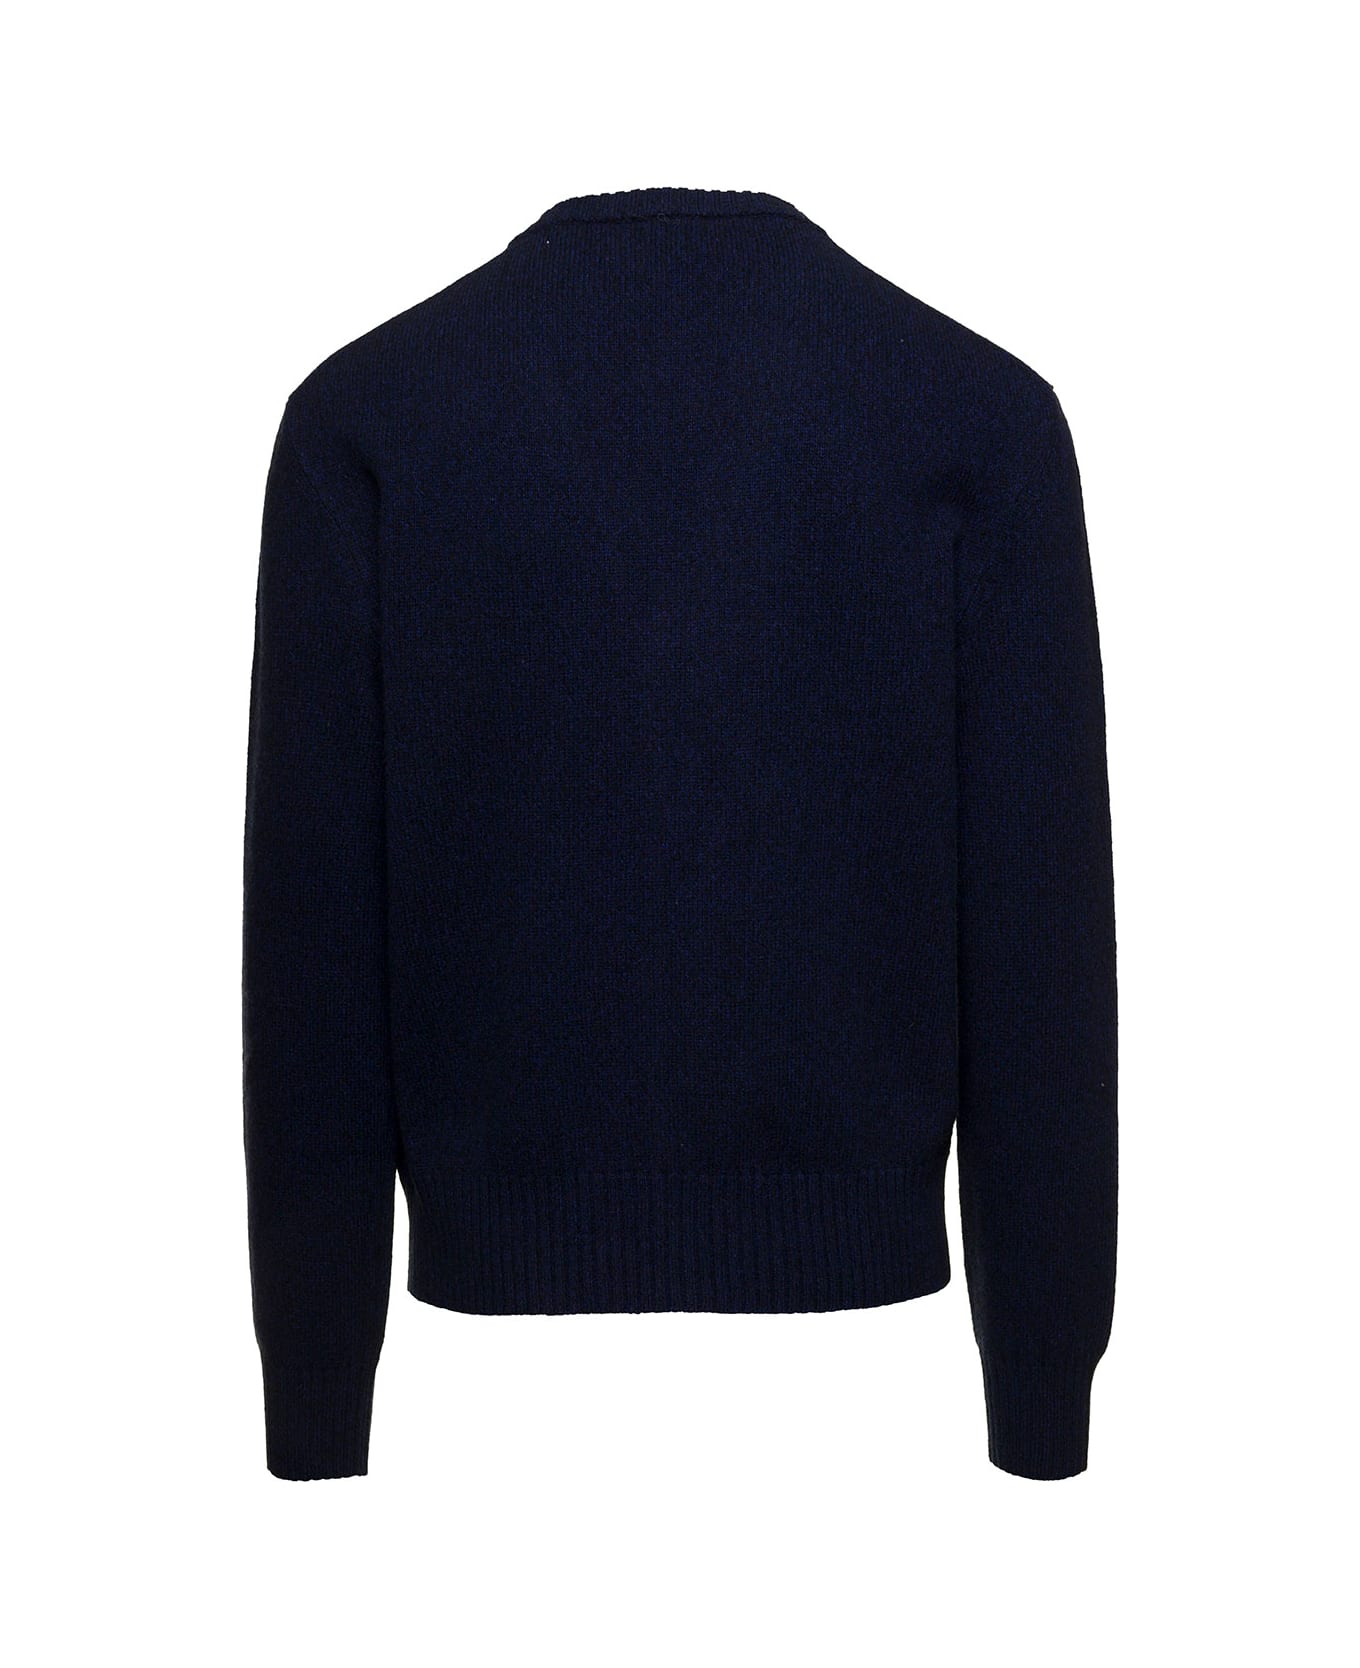 Ami Alexandre Mattiussi Blue Cardigan With Adc Embroidery In Cashmere And Wool Blend Man - Blu カーディガン